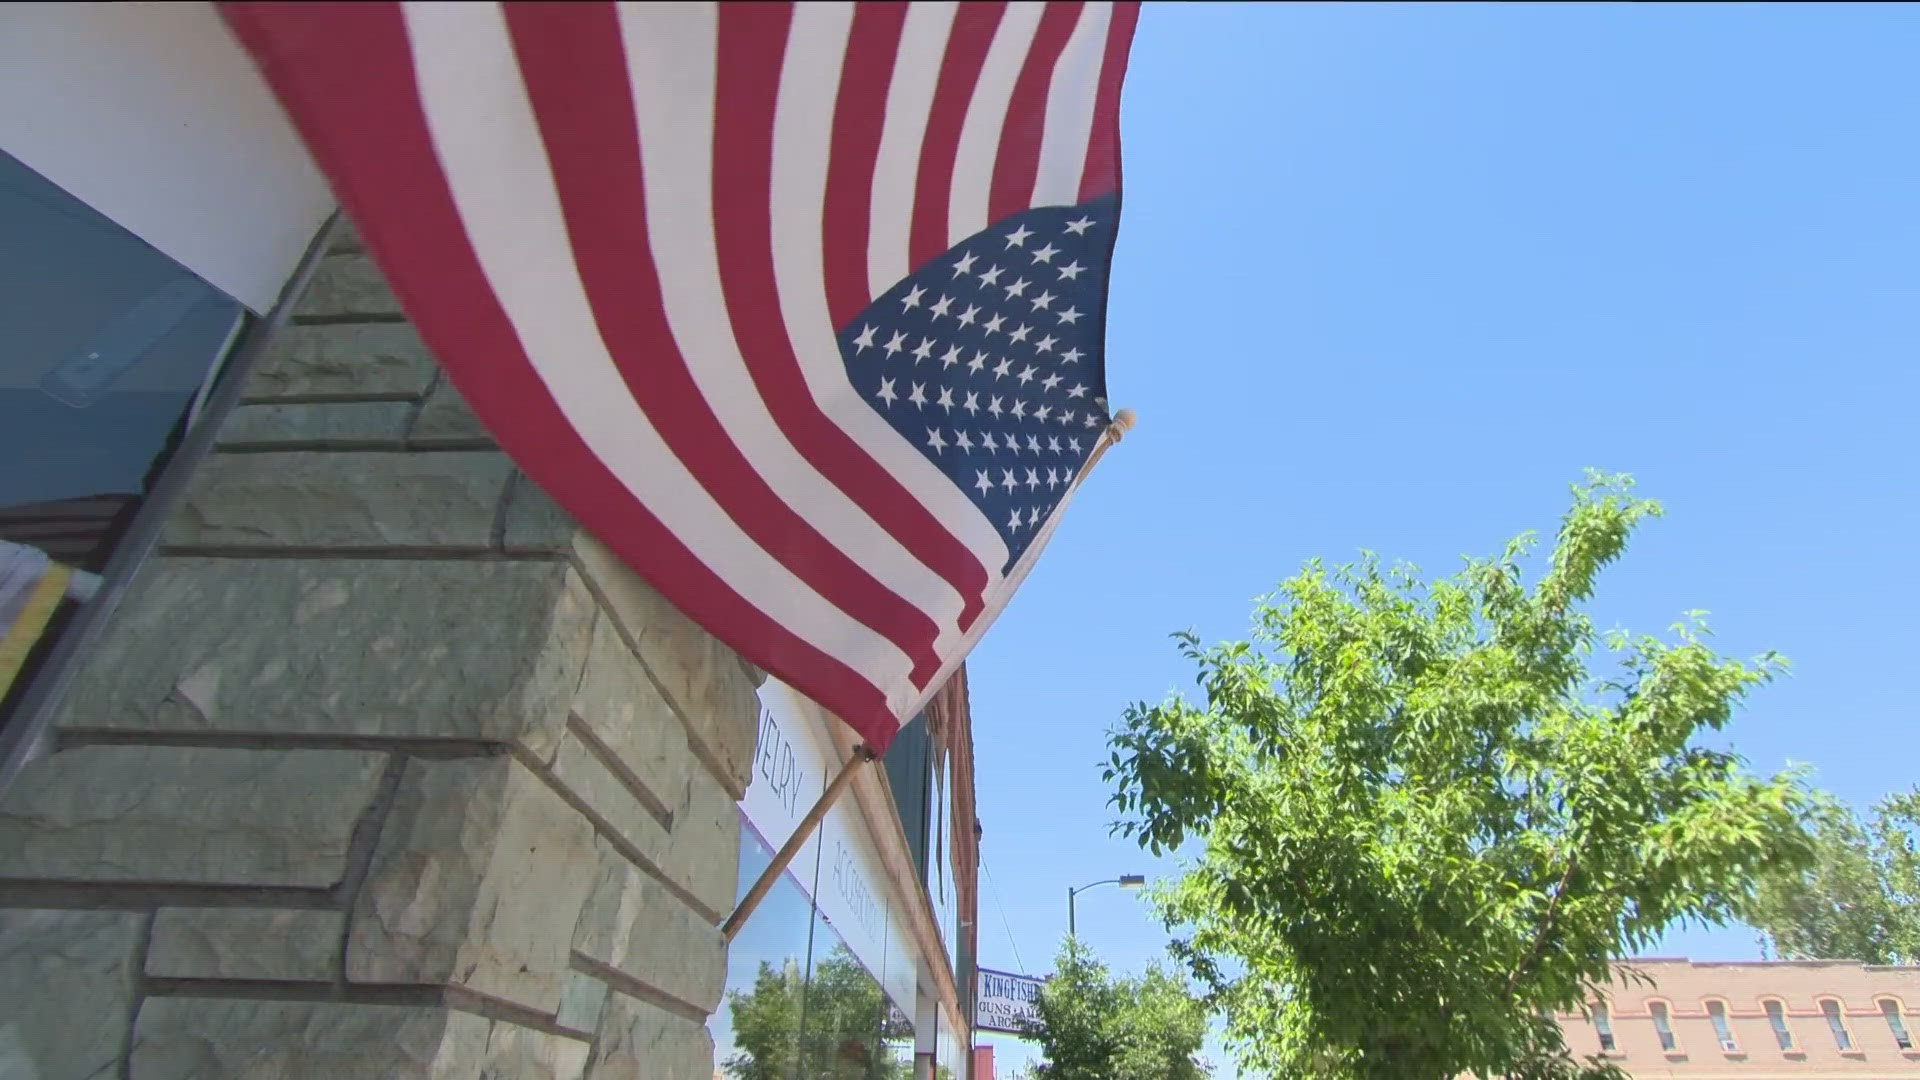 Emmett residents reflect on the importance of Flag Day and how the flag represents all Americans.